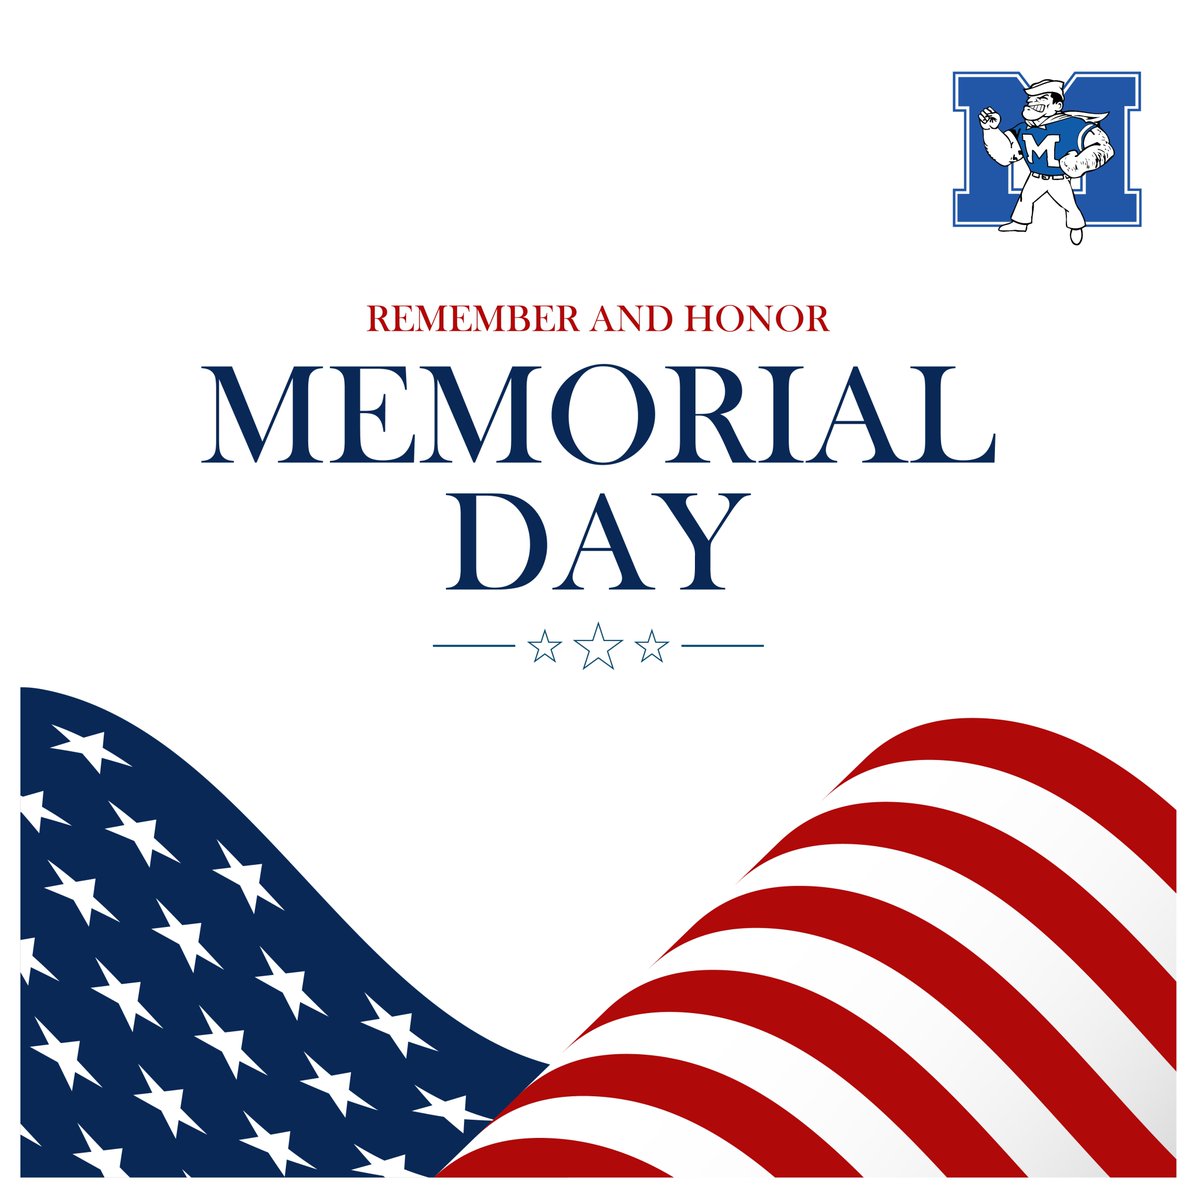 Midview Local Schools would like to wish our community a Happy Memorial Day. As we enjoy the day with friends and family, let us always remember the brave men and women who made the ultimate sacrifice in service to our country.